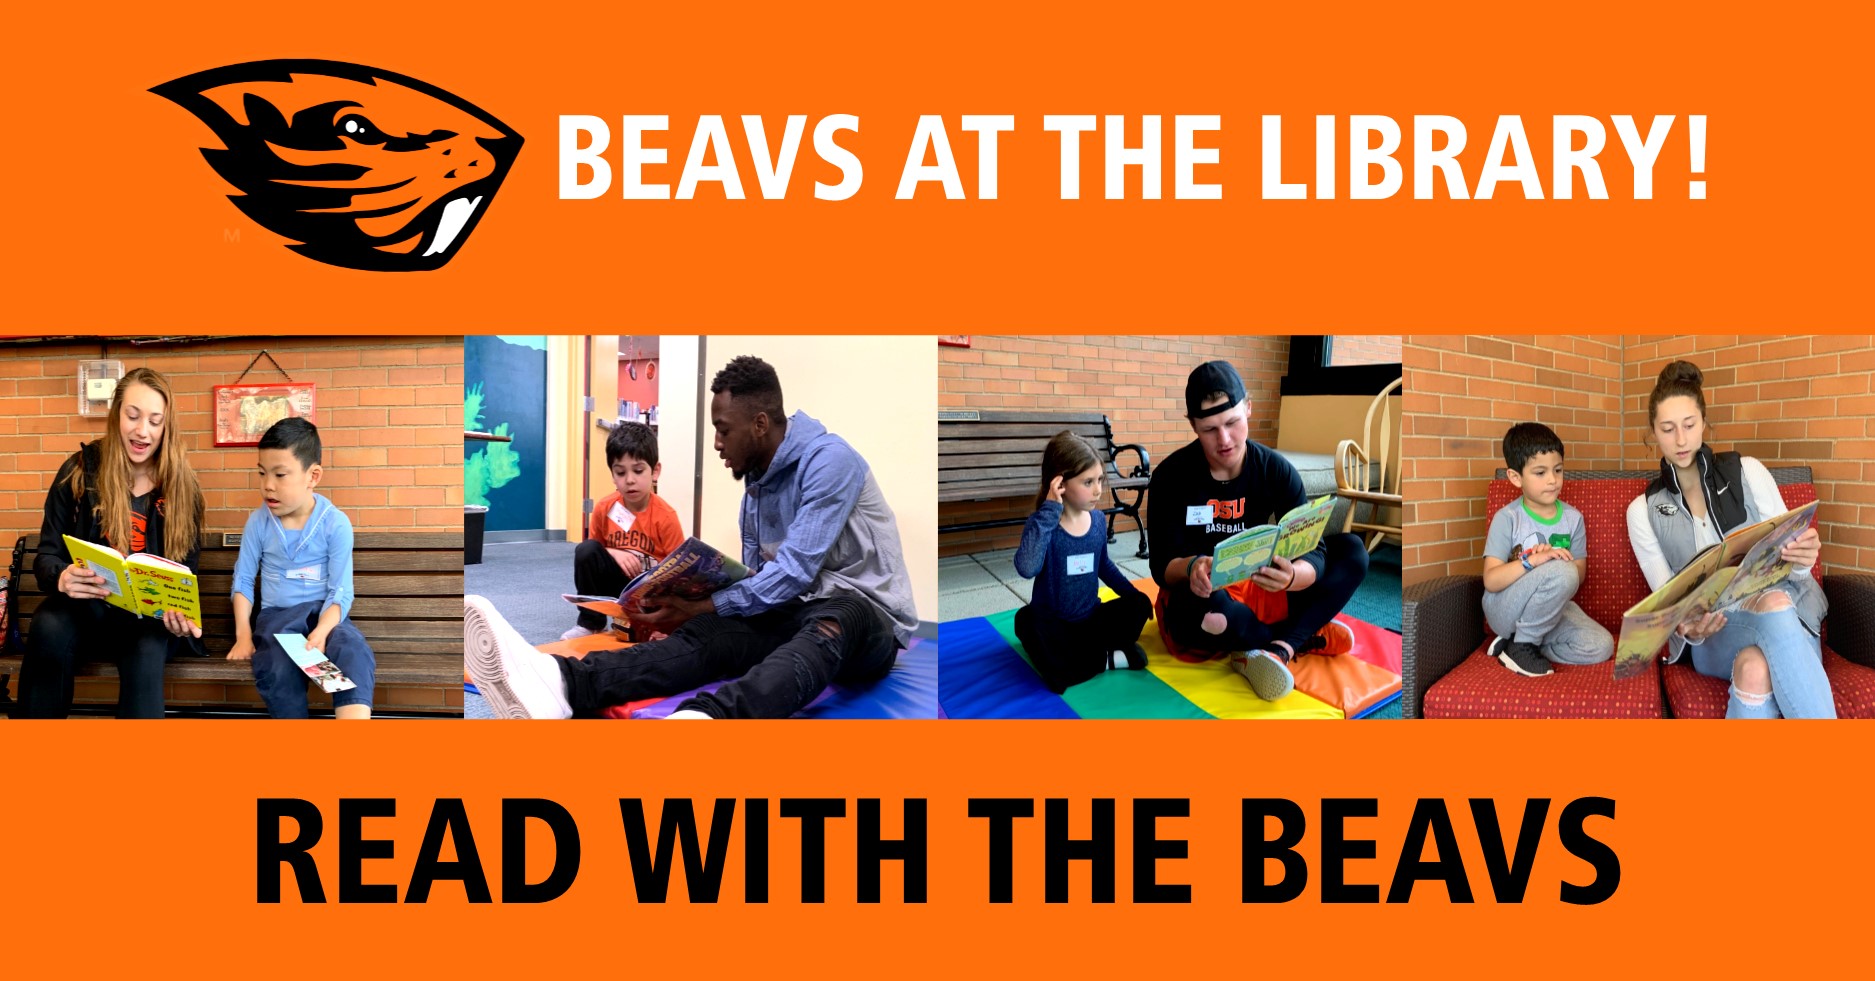 Beavs at the Library: Read with the Beavs with photos of athletes and children reading.